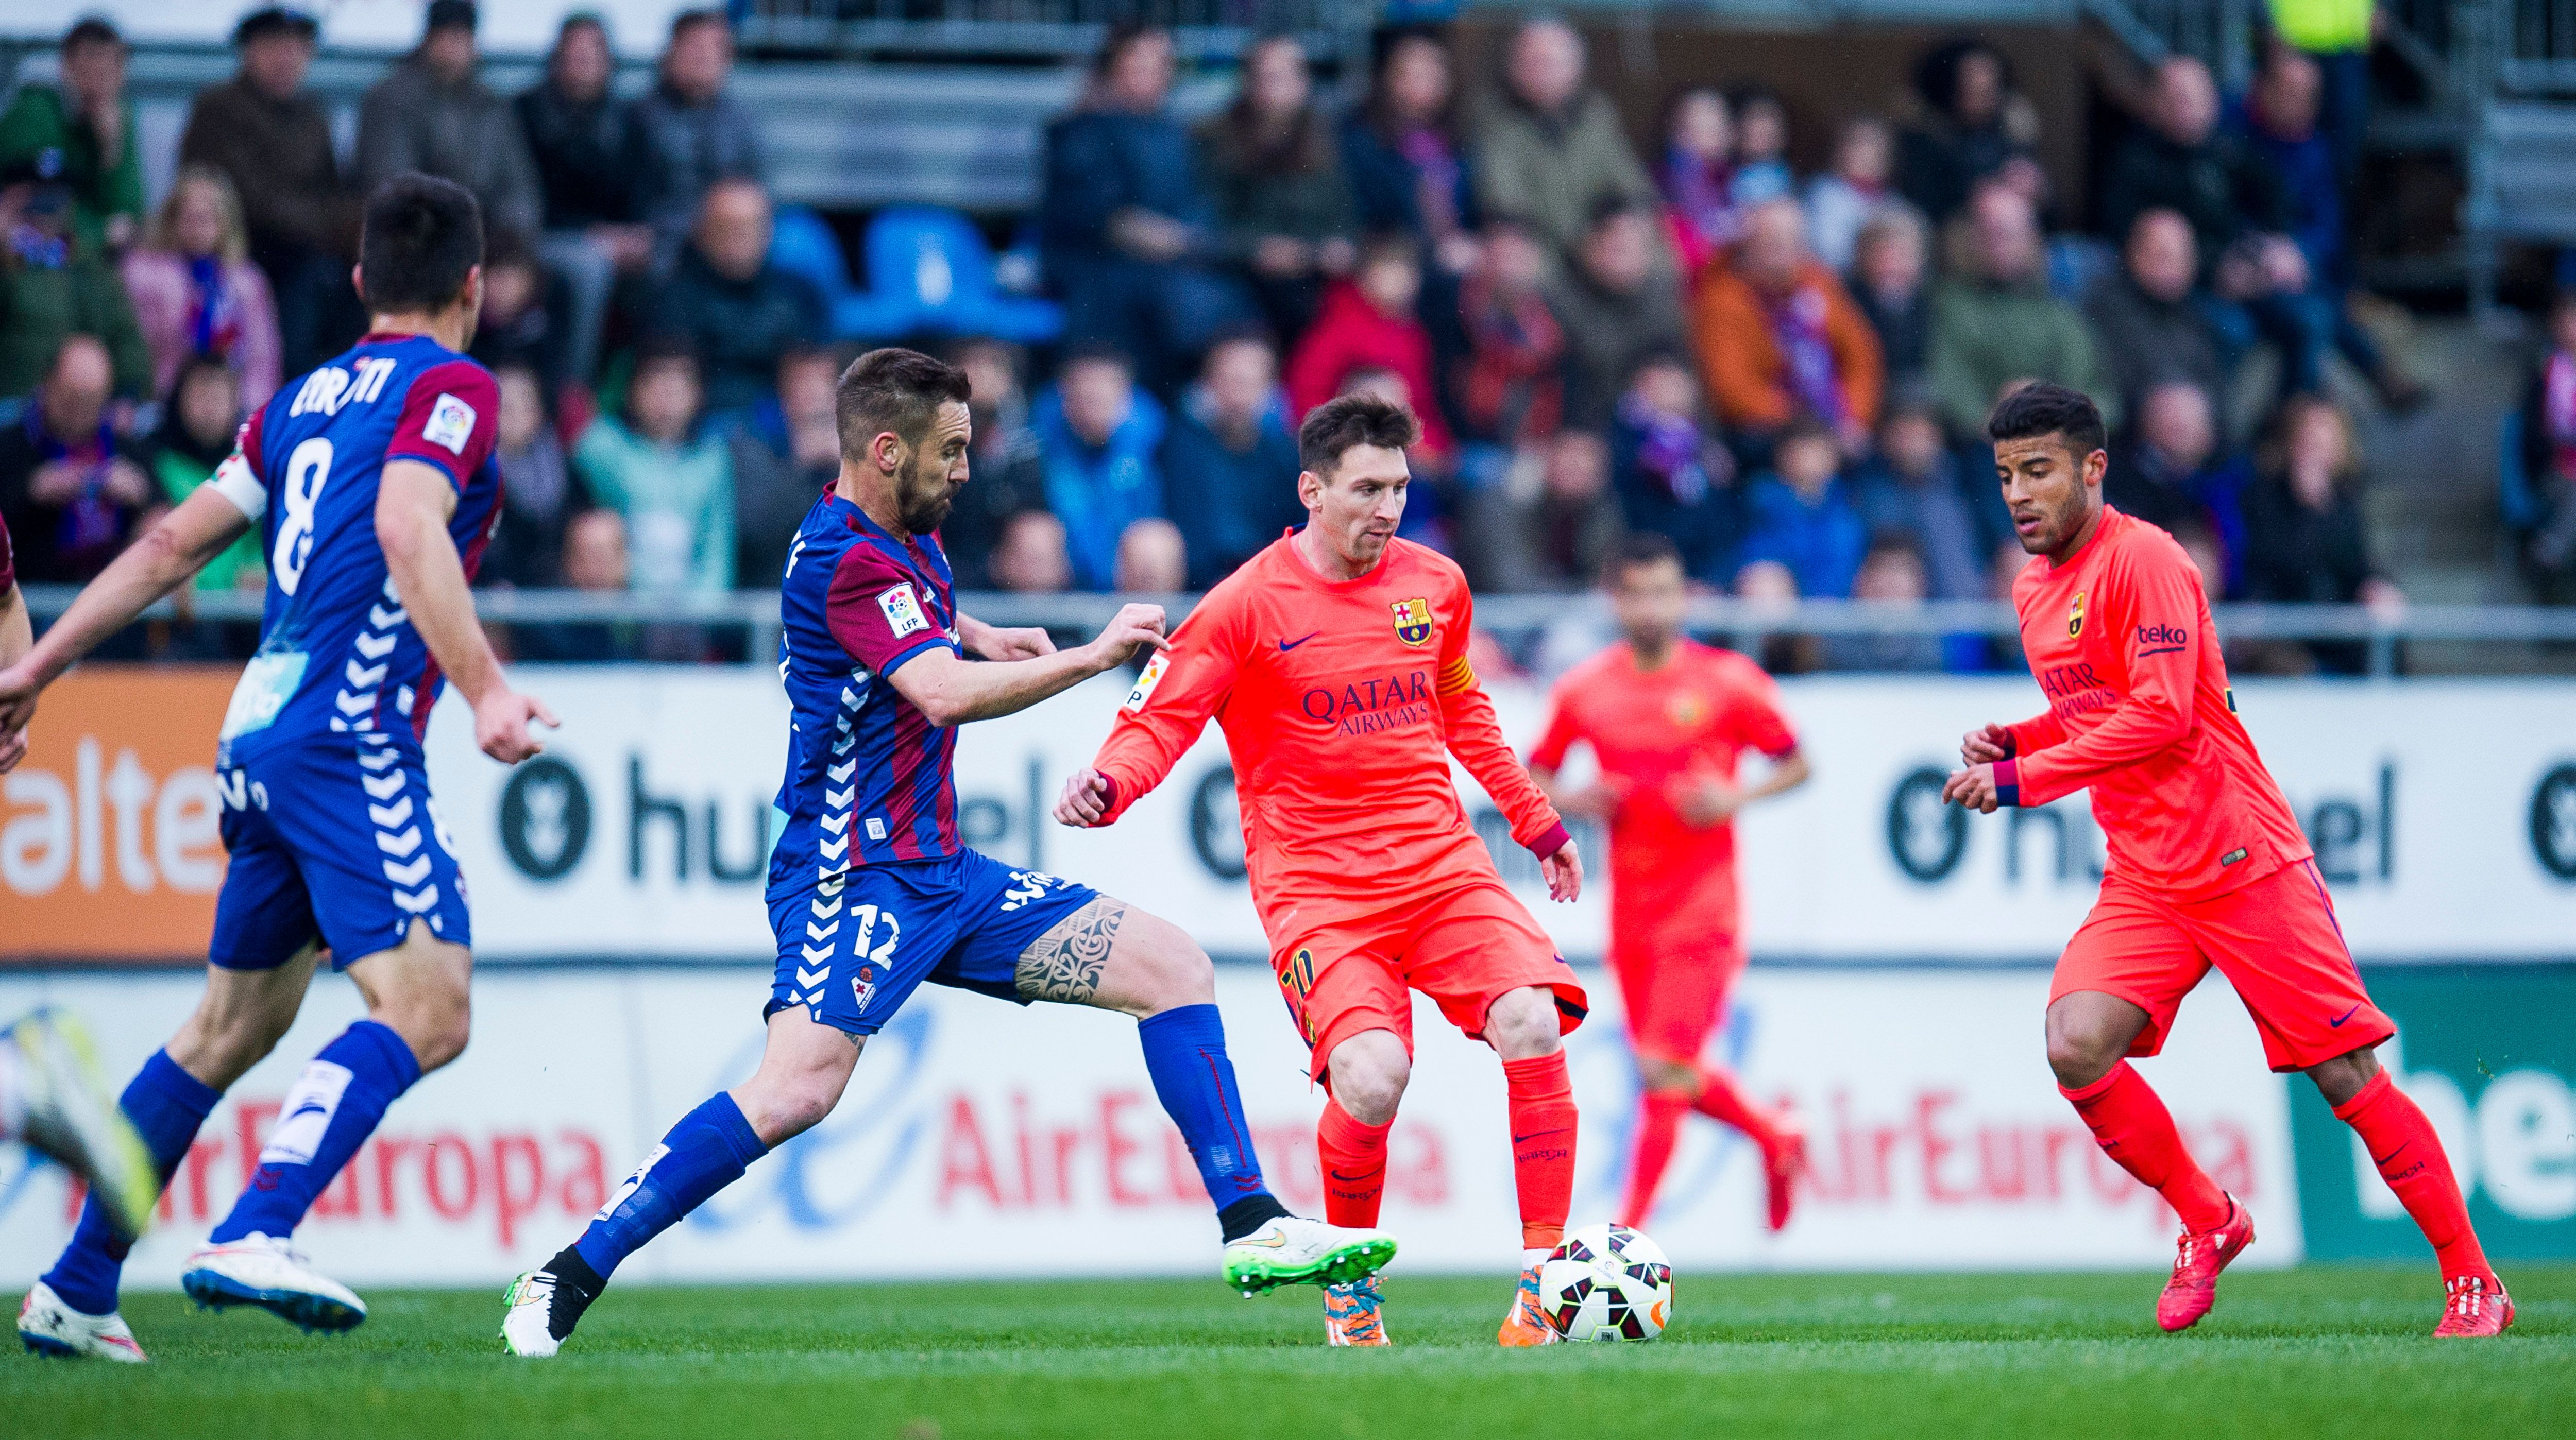 Lionel Messi's greatest dribble? Viral video of Barcelona's legend's epic run in 2015